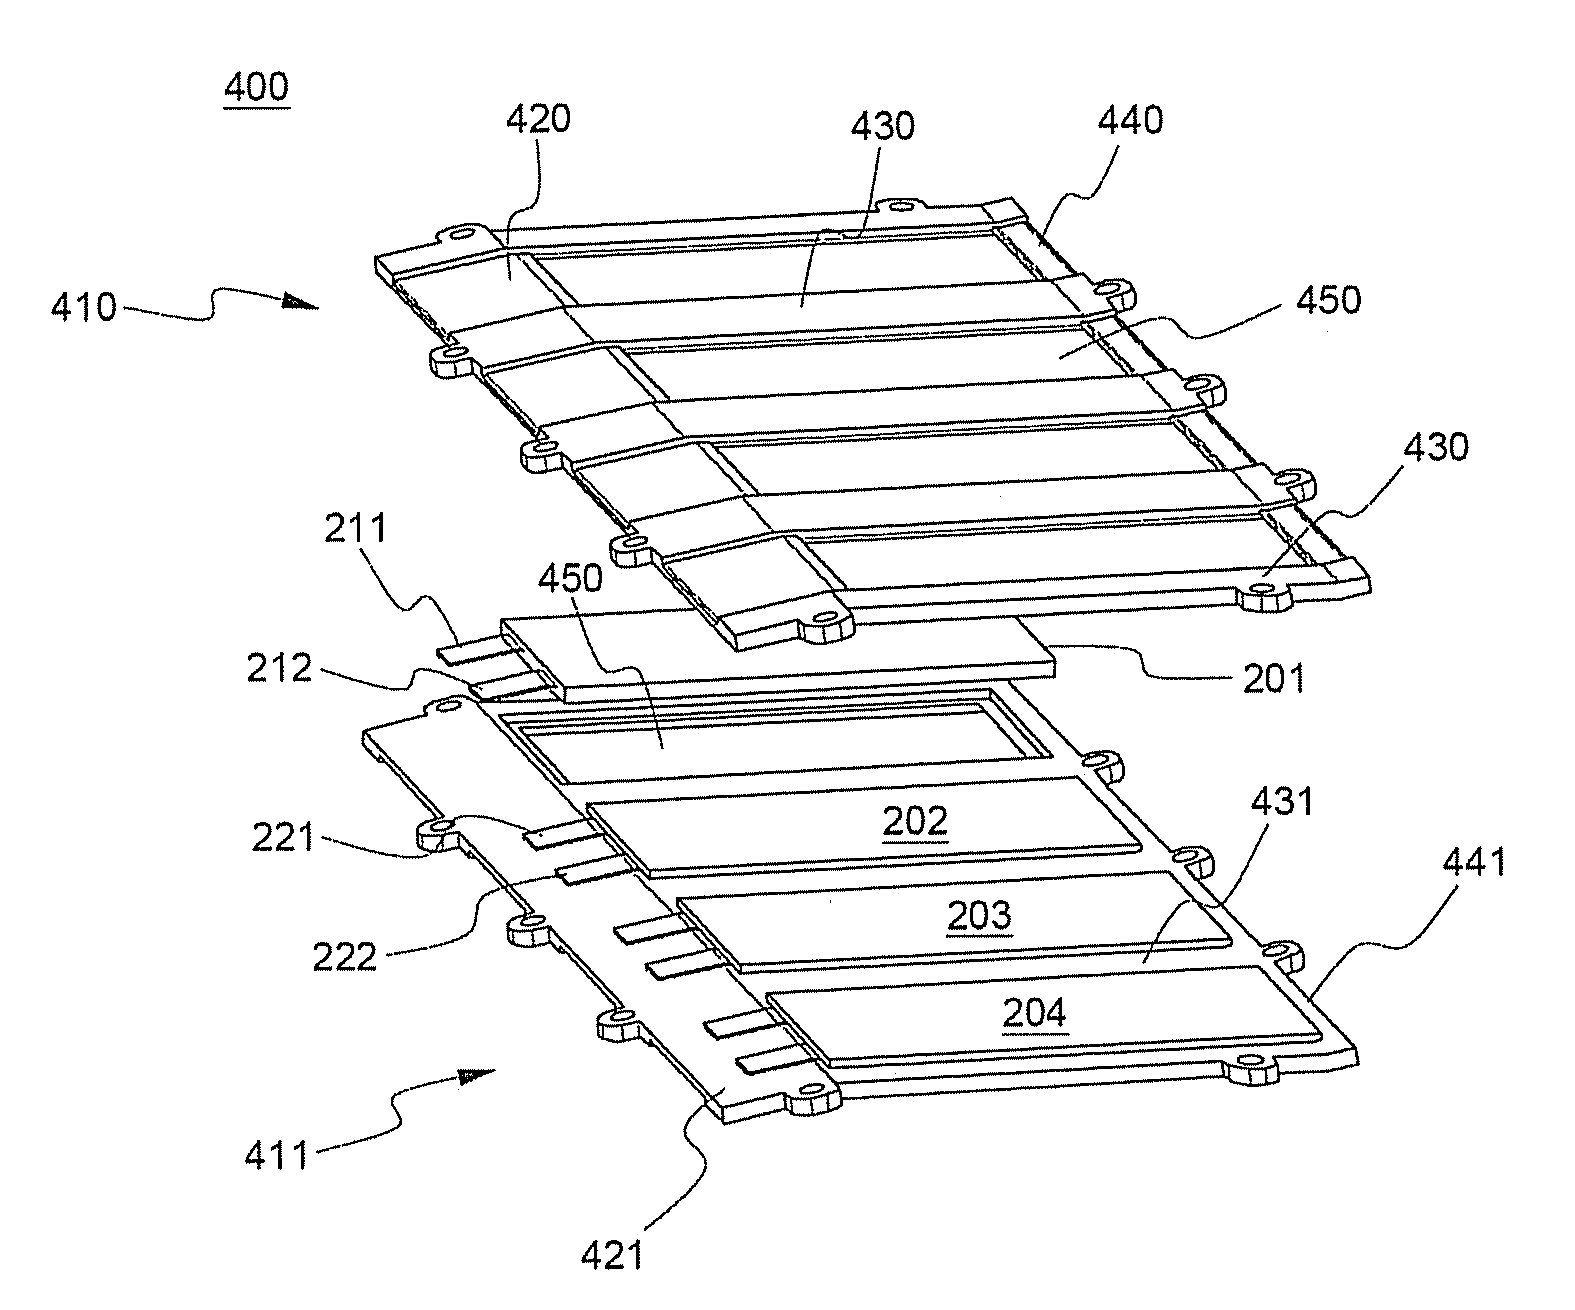 Battery module of high cooling efficiency